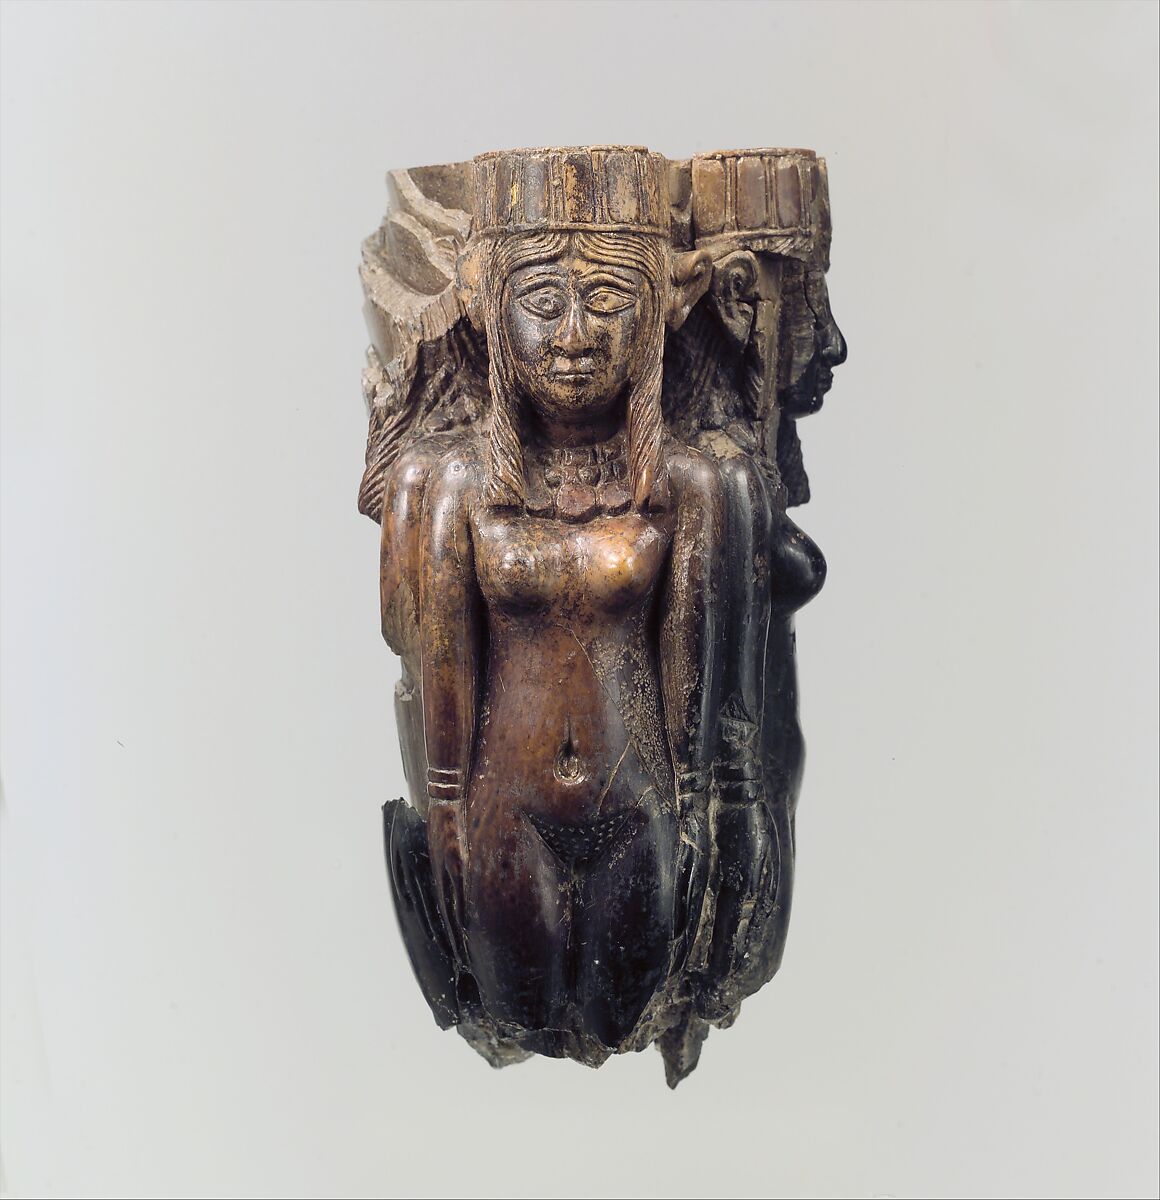 Fan or fly-whisk handle in the form of four female figures